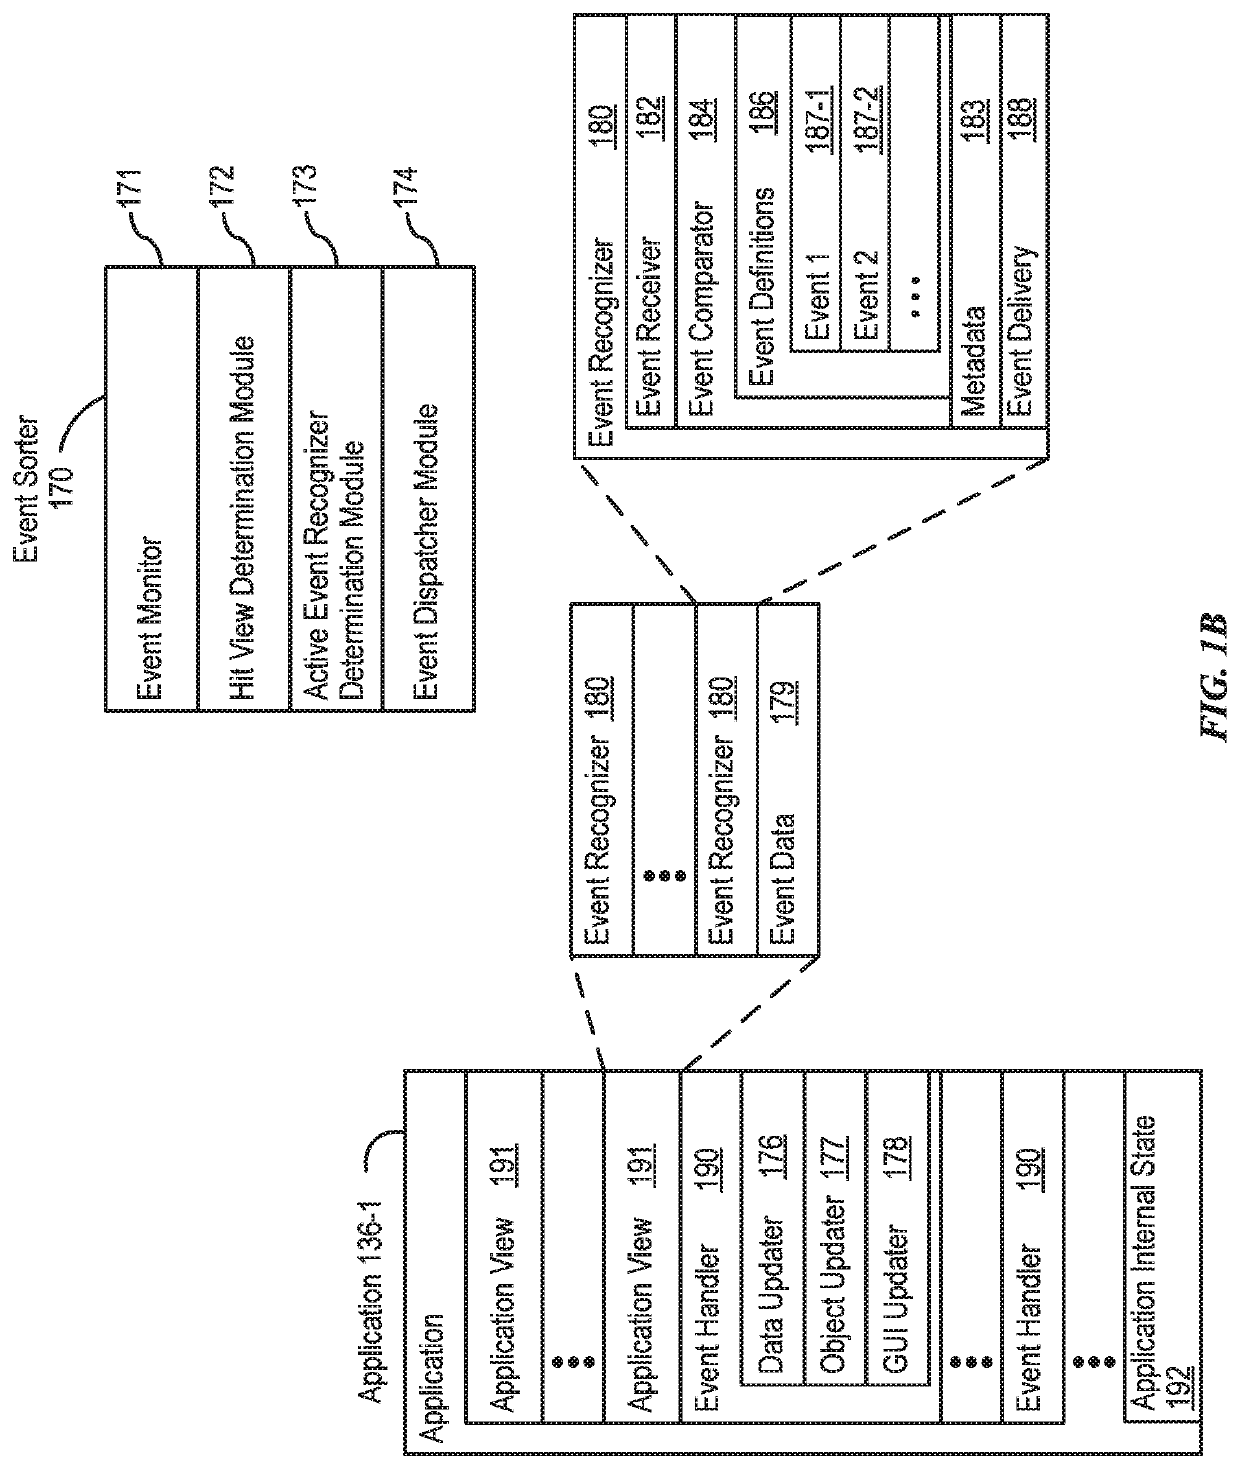 Dynamically adjusting touch hysteresis based on contextual data